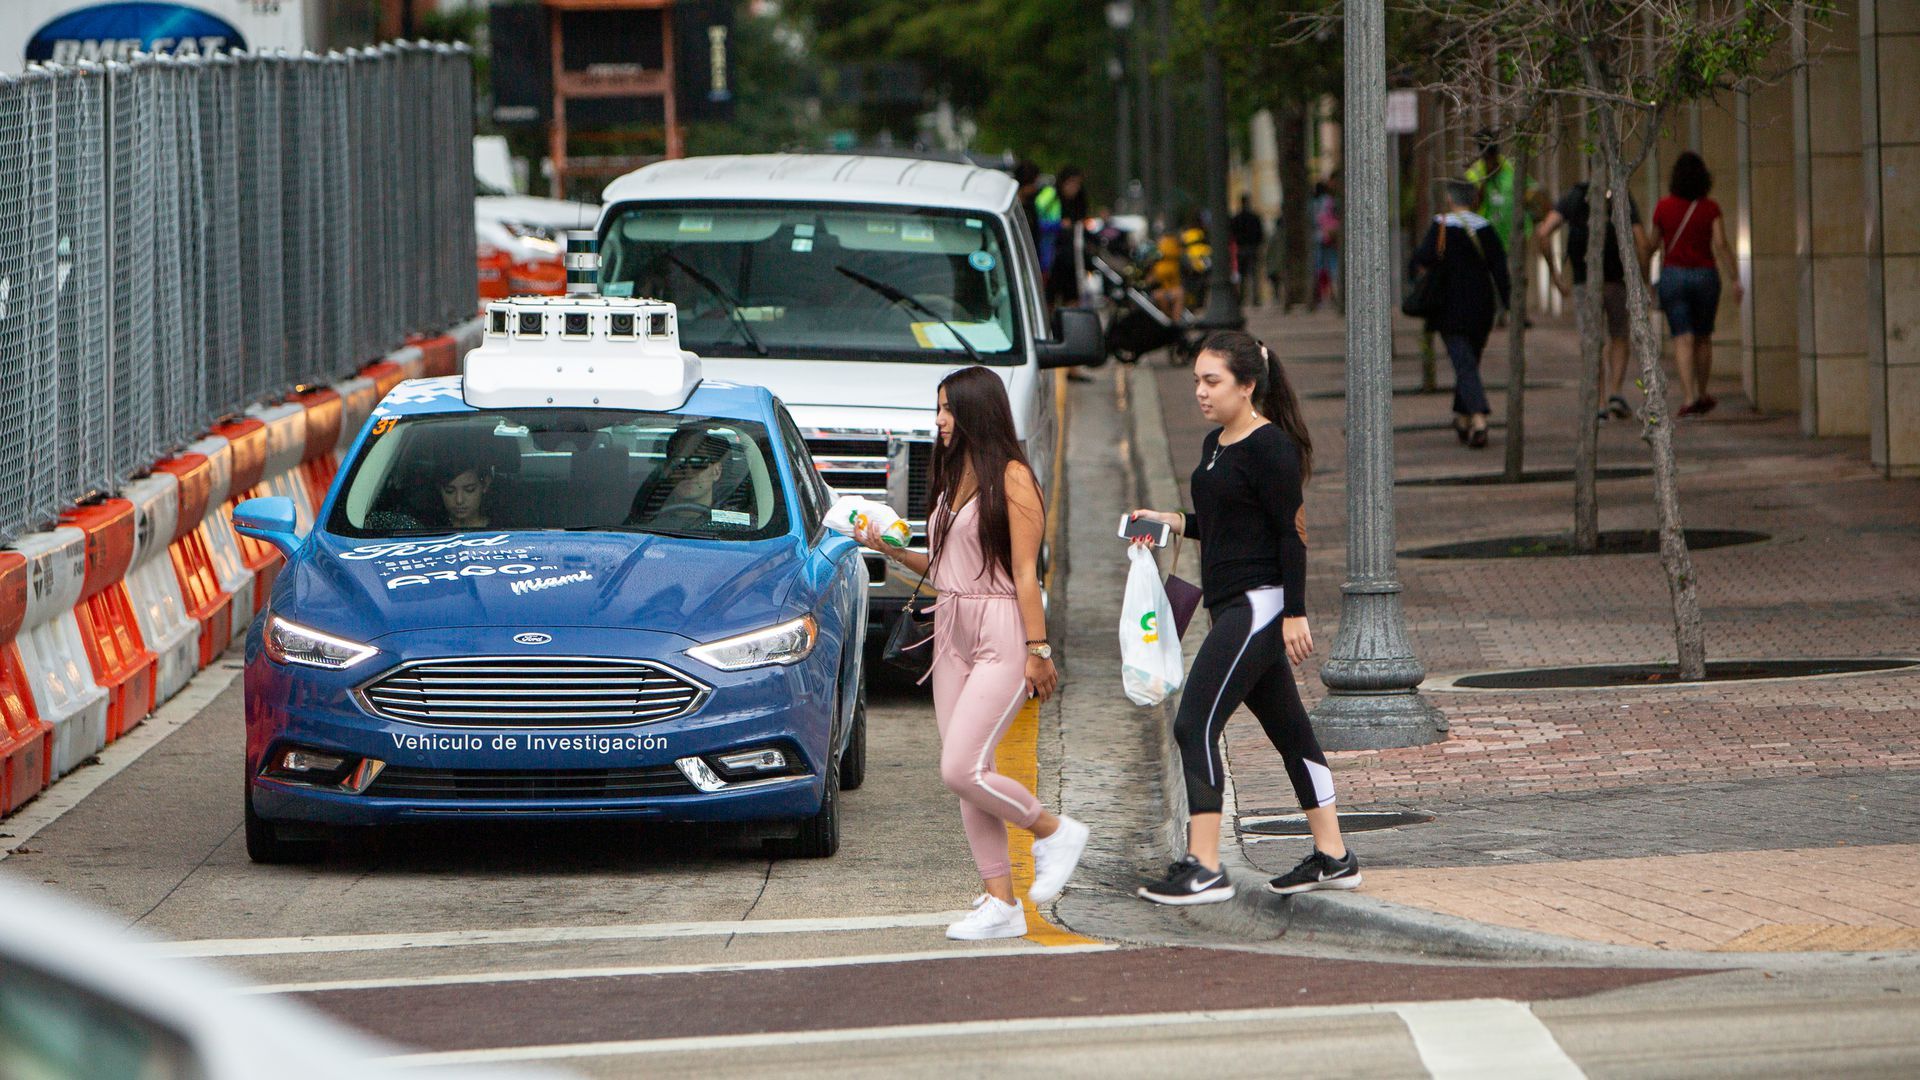 In this image, pedestrians cross a city street in front of a blue sedan. 